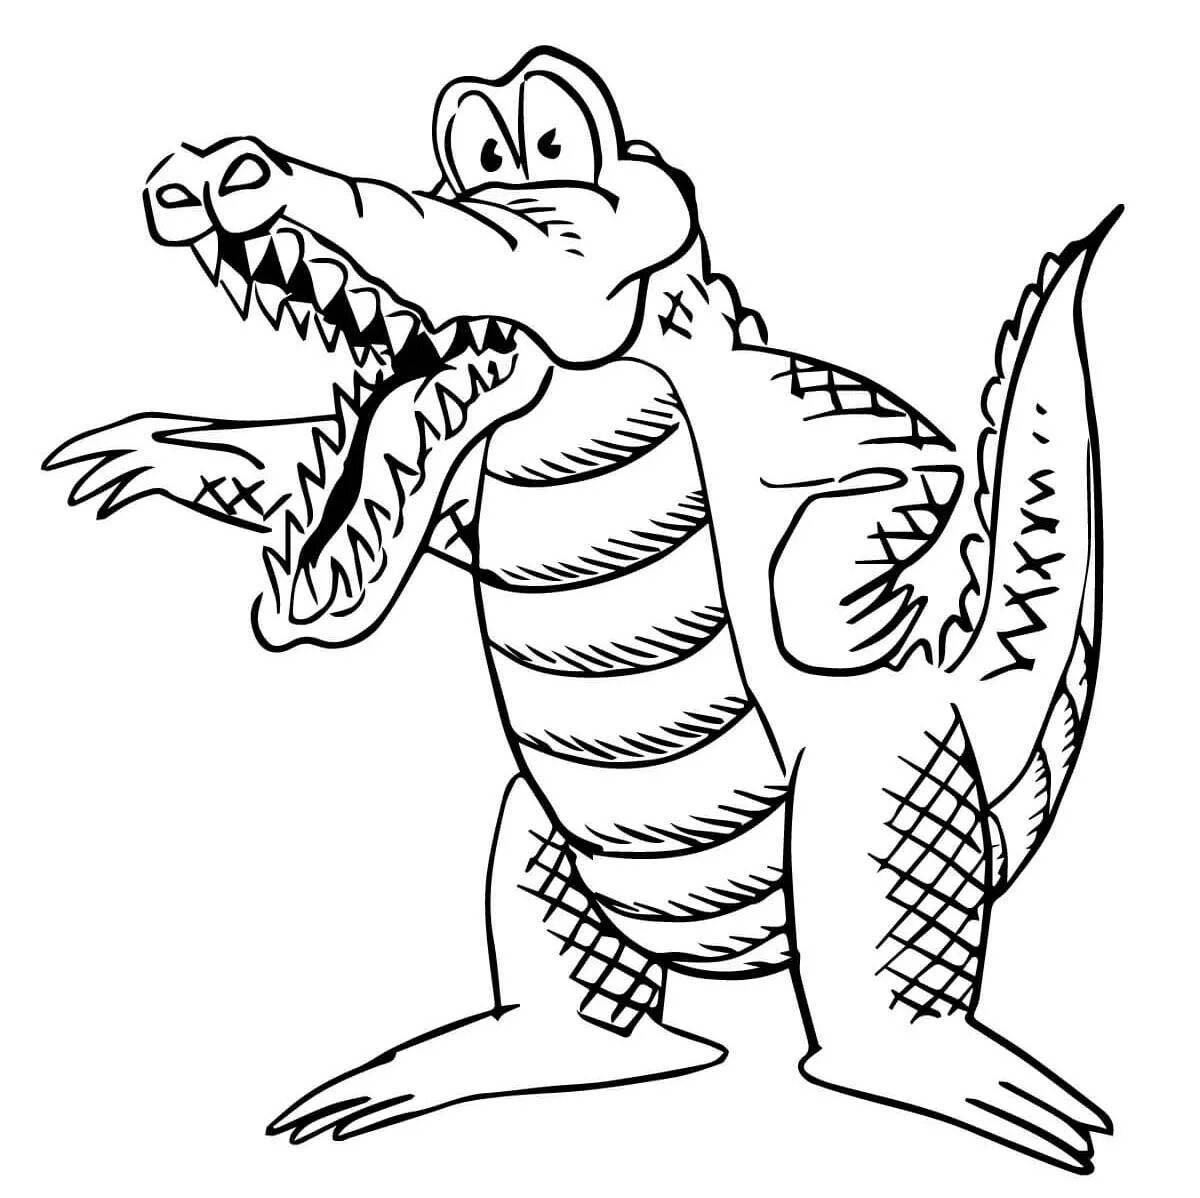 Monty's charming alligator coloring book